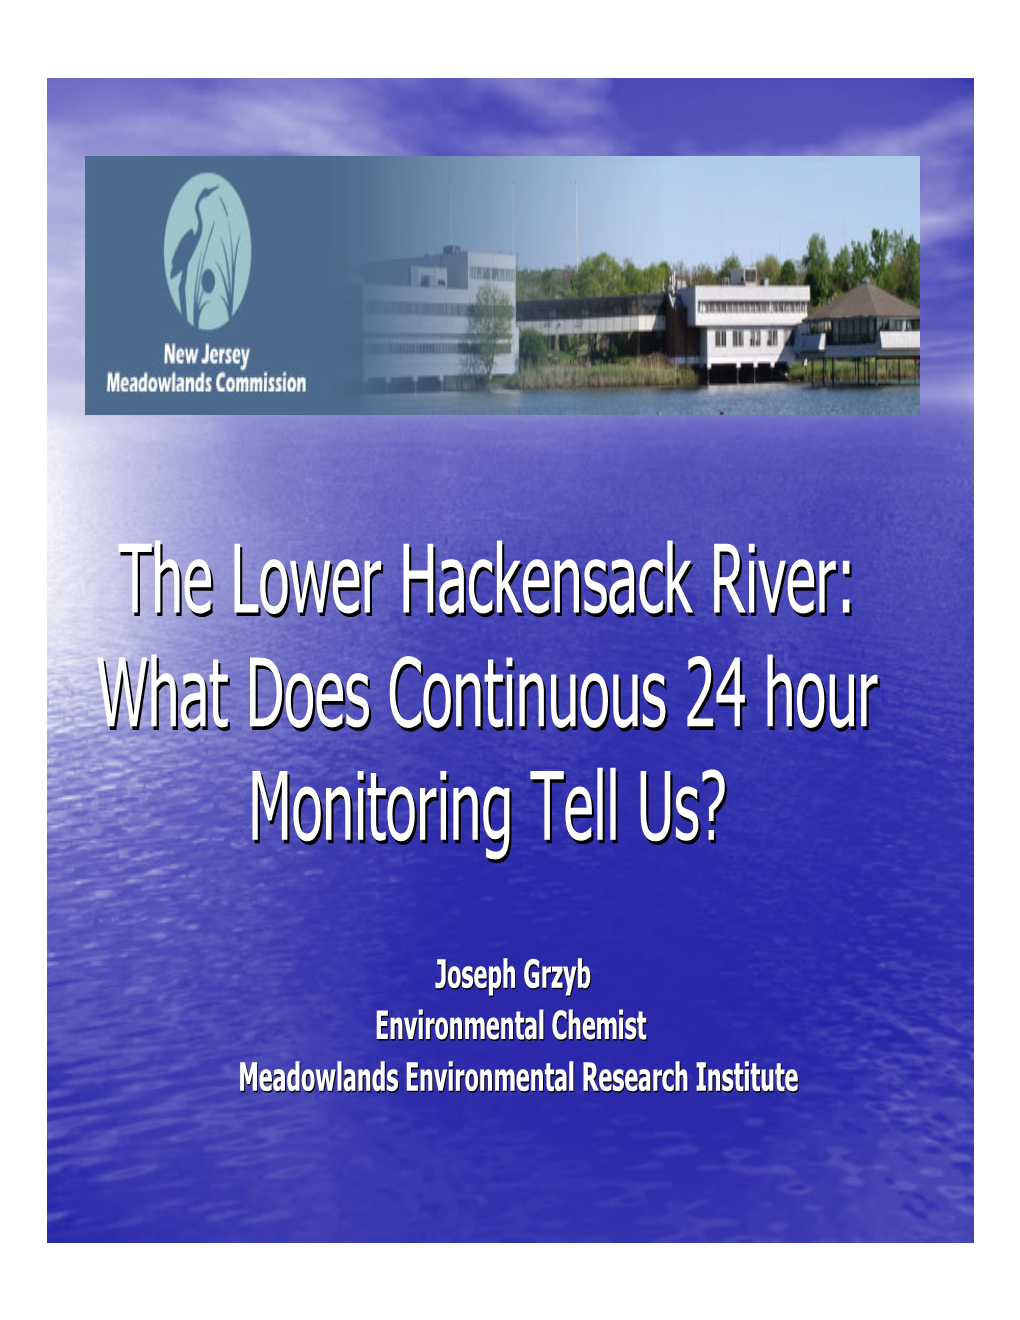 The Lower Hackensack River: What Does Continuous 24 Hour